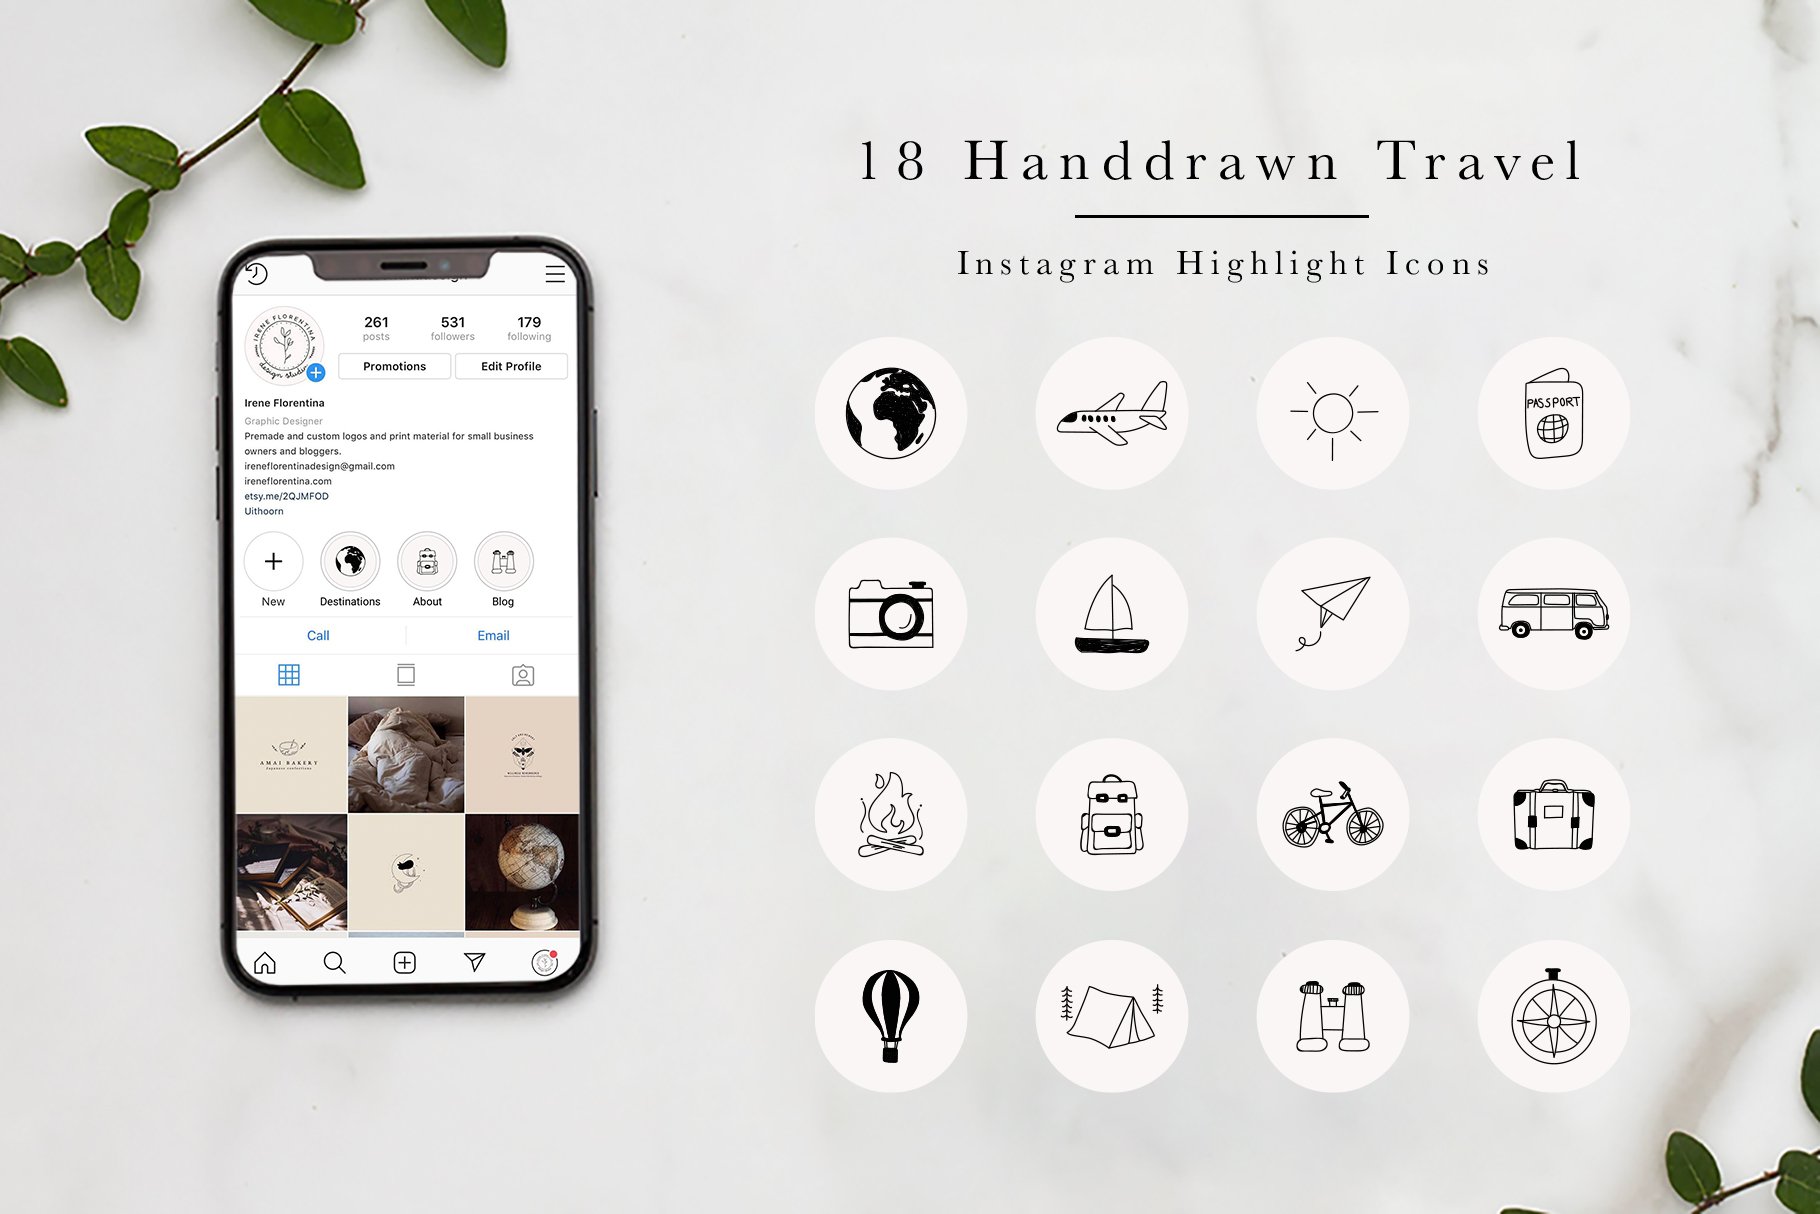 Travel Highlight Icons for Instagram cover image.